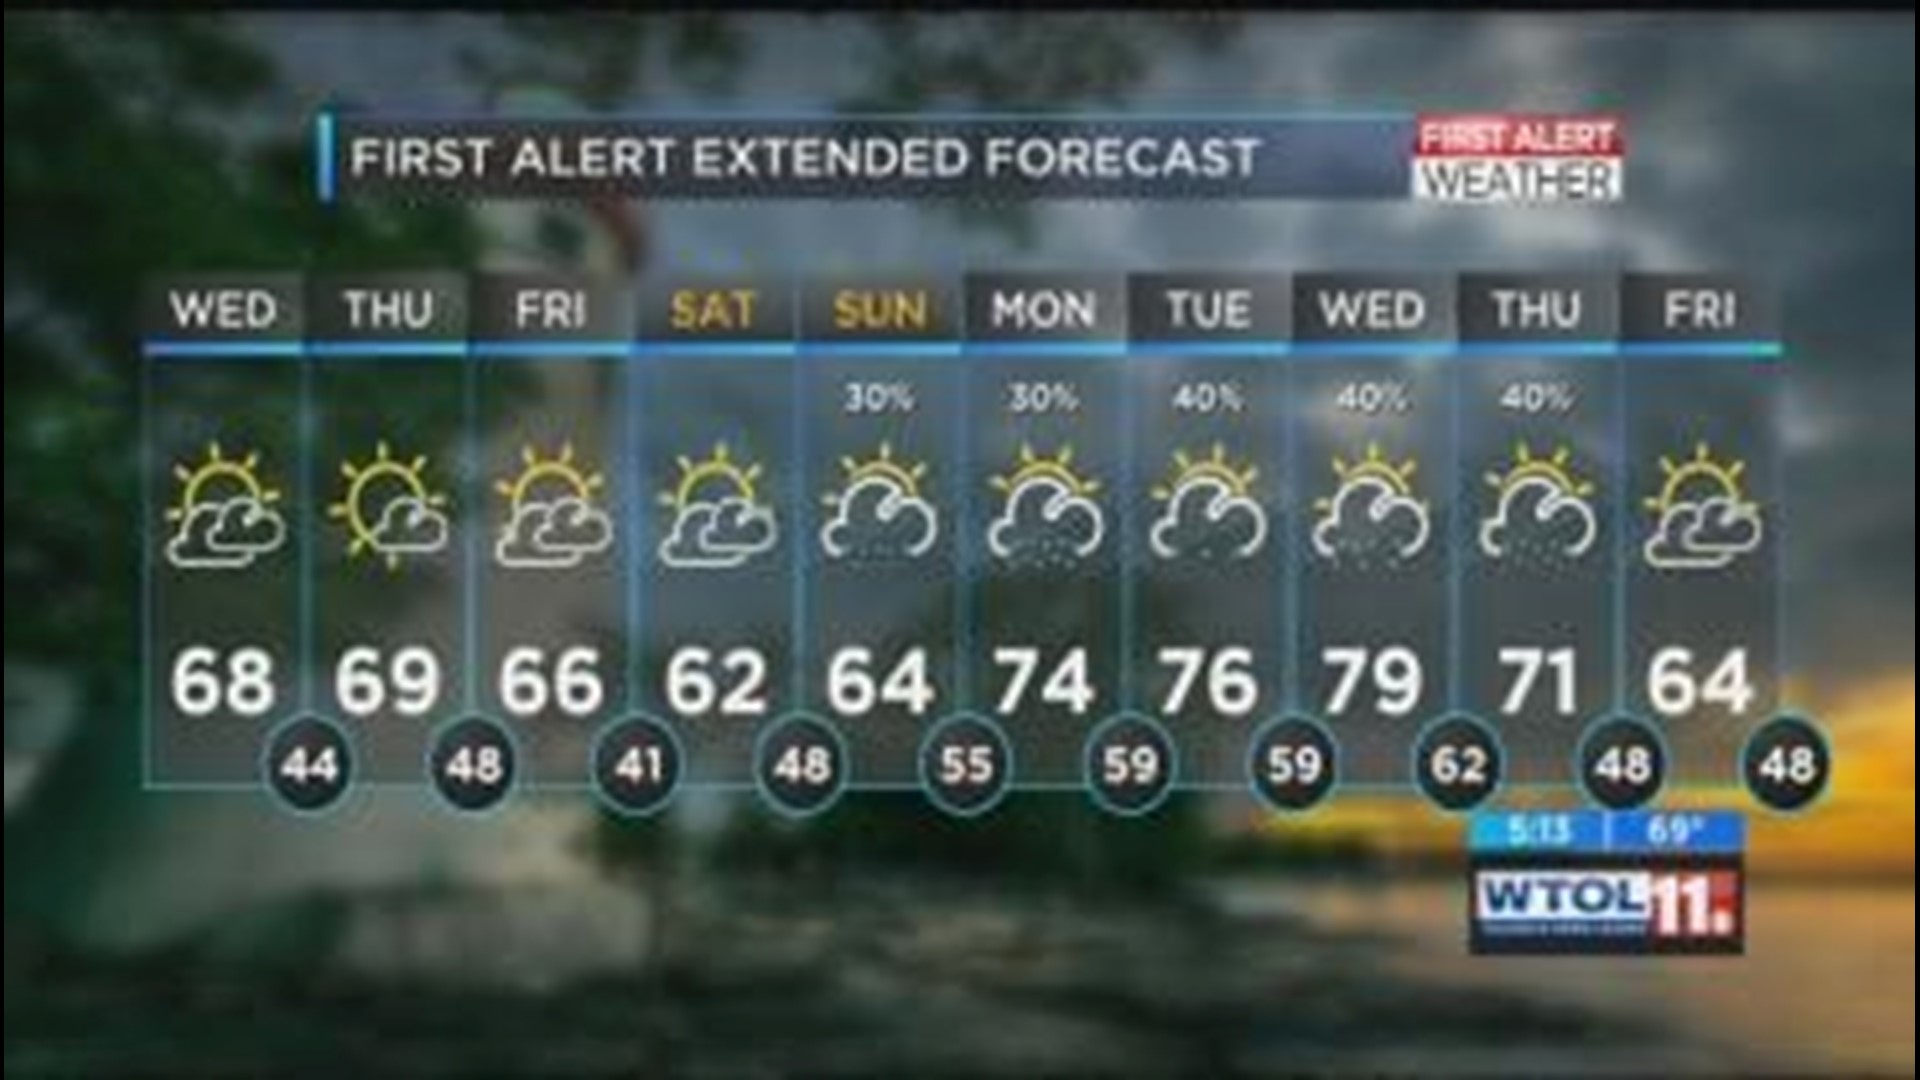 First Alert Forecast: Lower temperatures and lower humidity